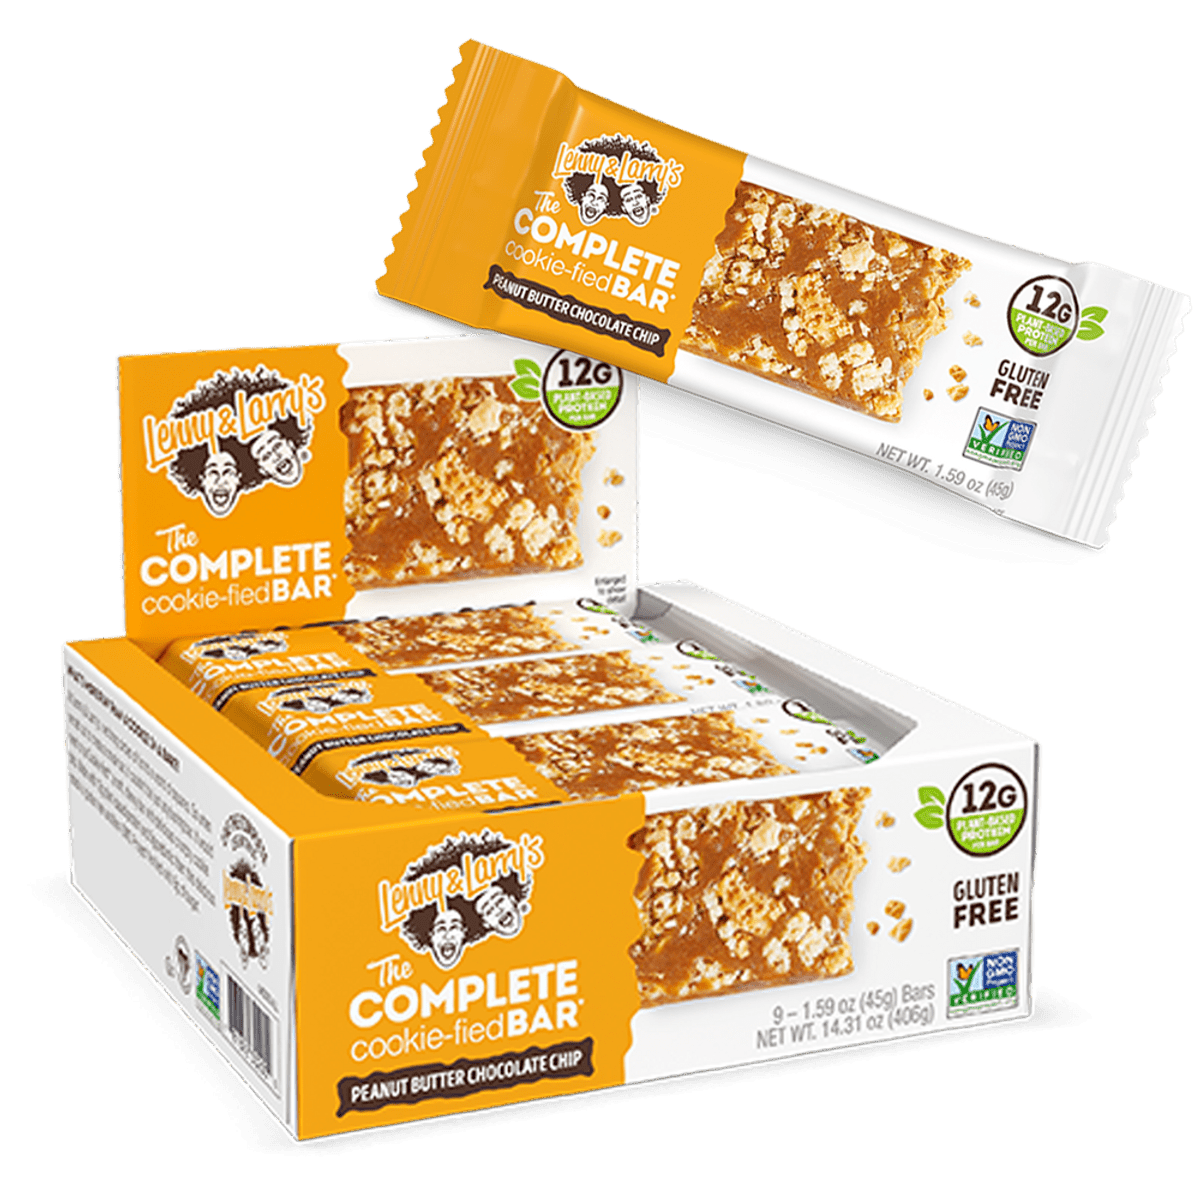 Peanut Butter Chocolate Chip - Box of 9